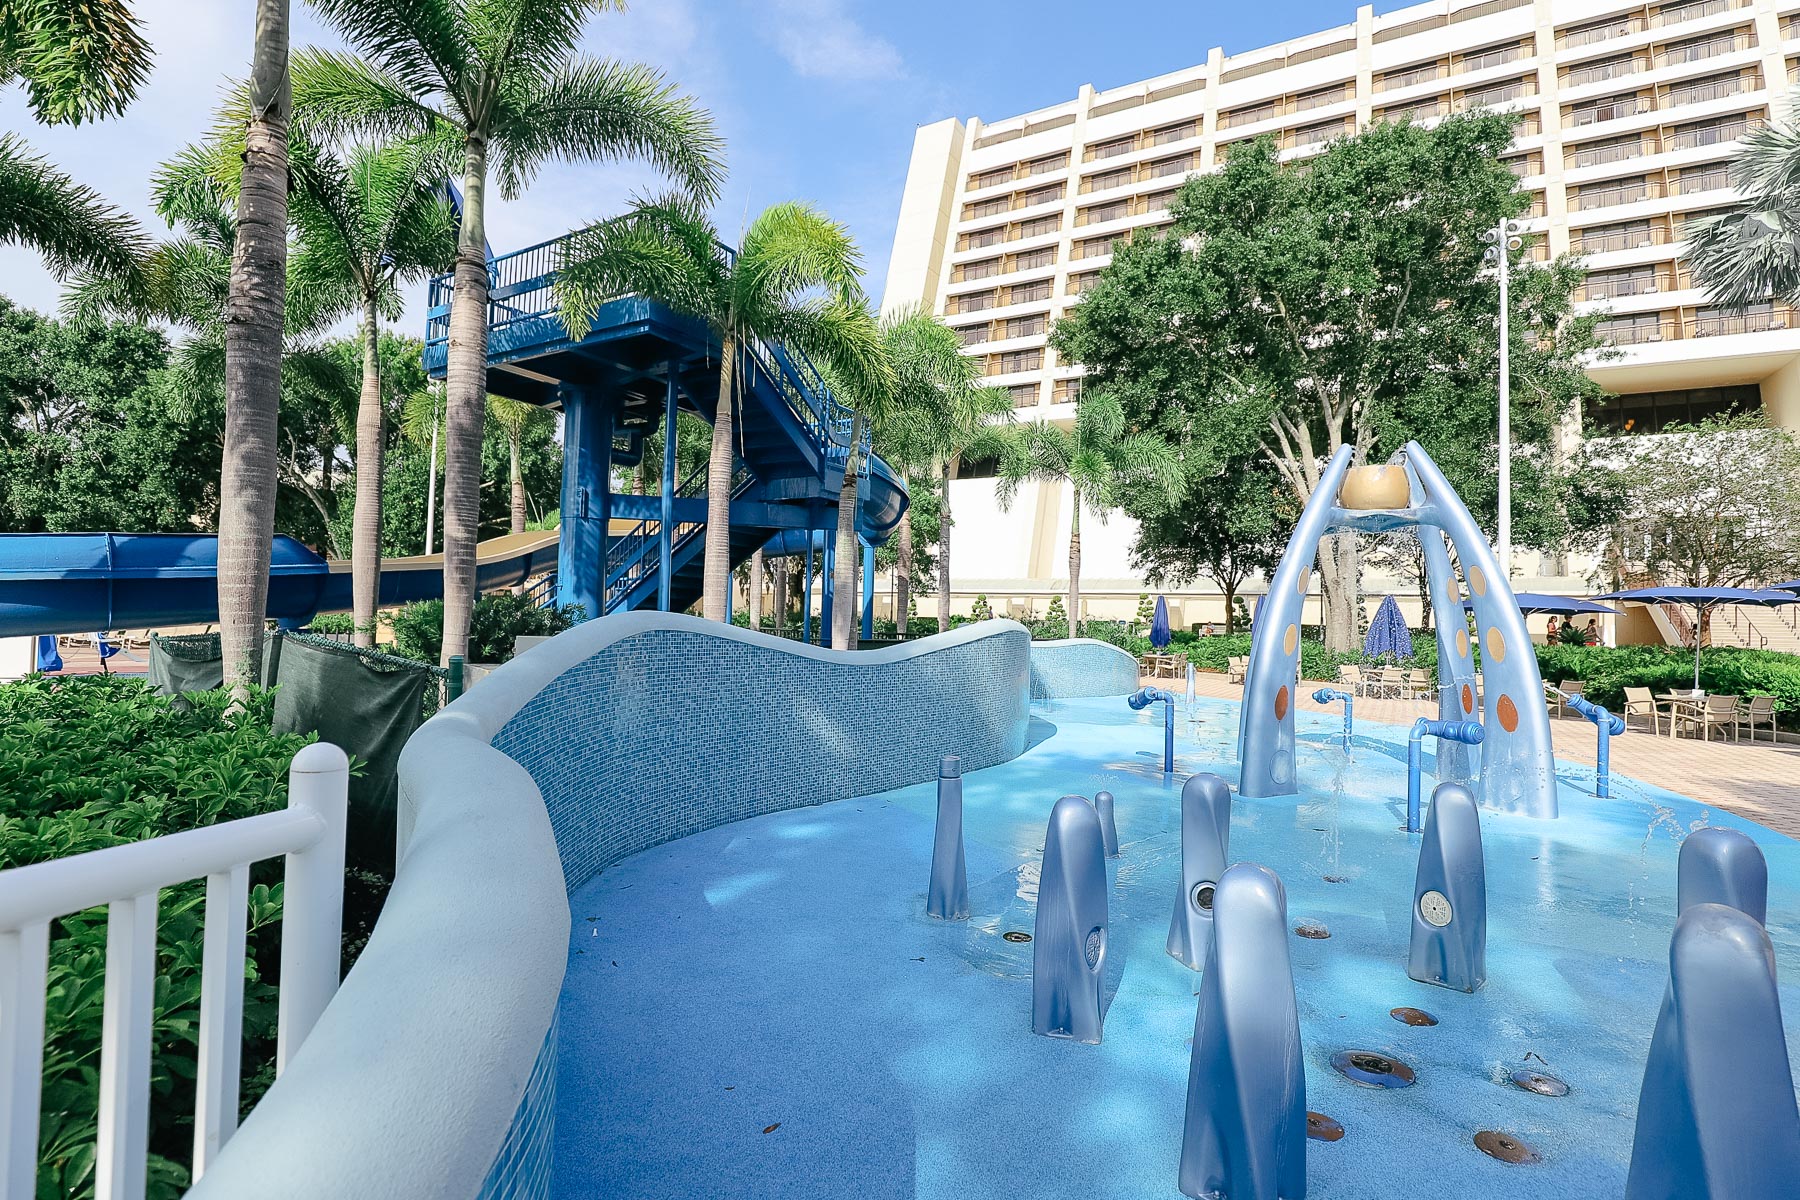 the splash pad sits between the water slide and the hotel 